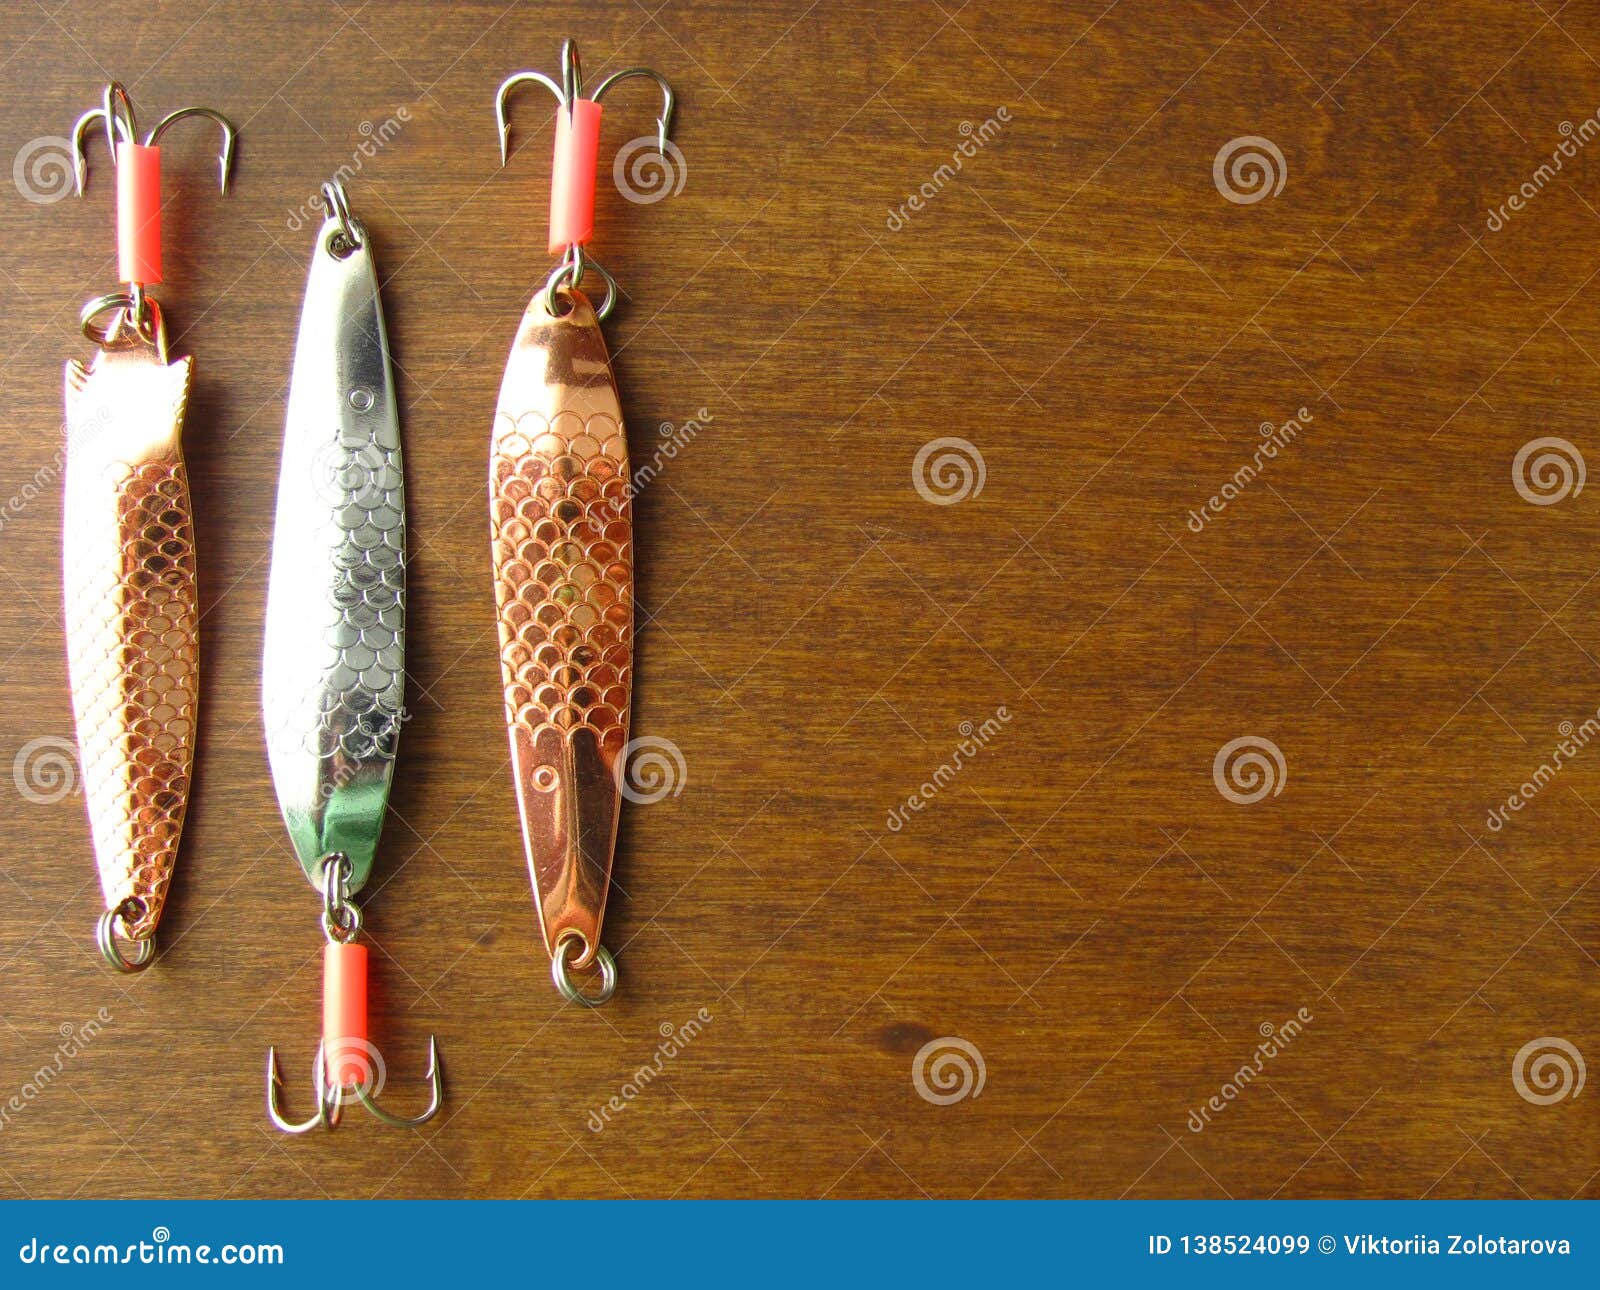 Bait for Fishing is on the Wooden Table. Stock Image - Image of